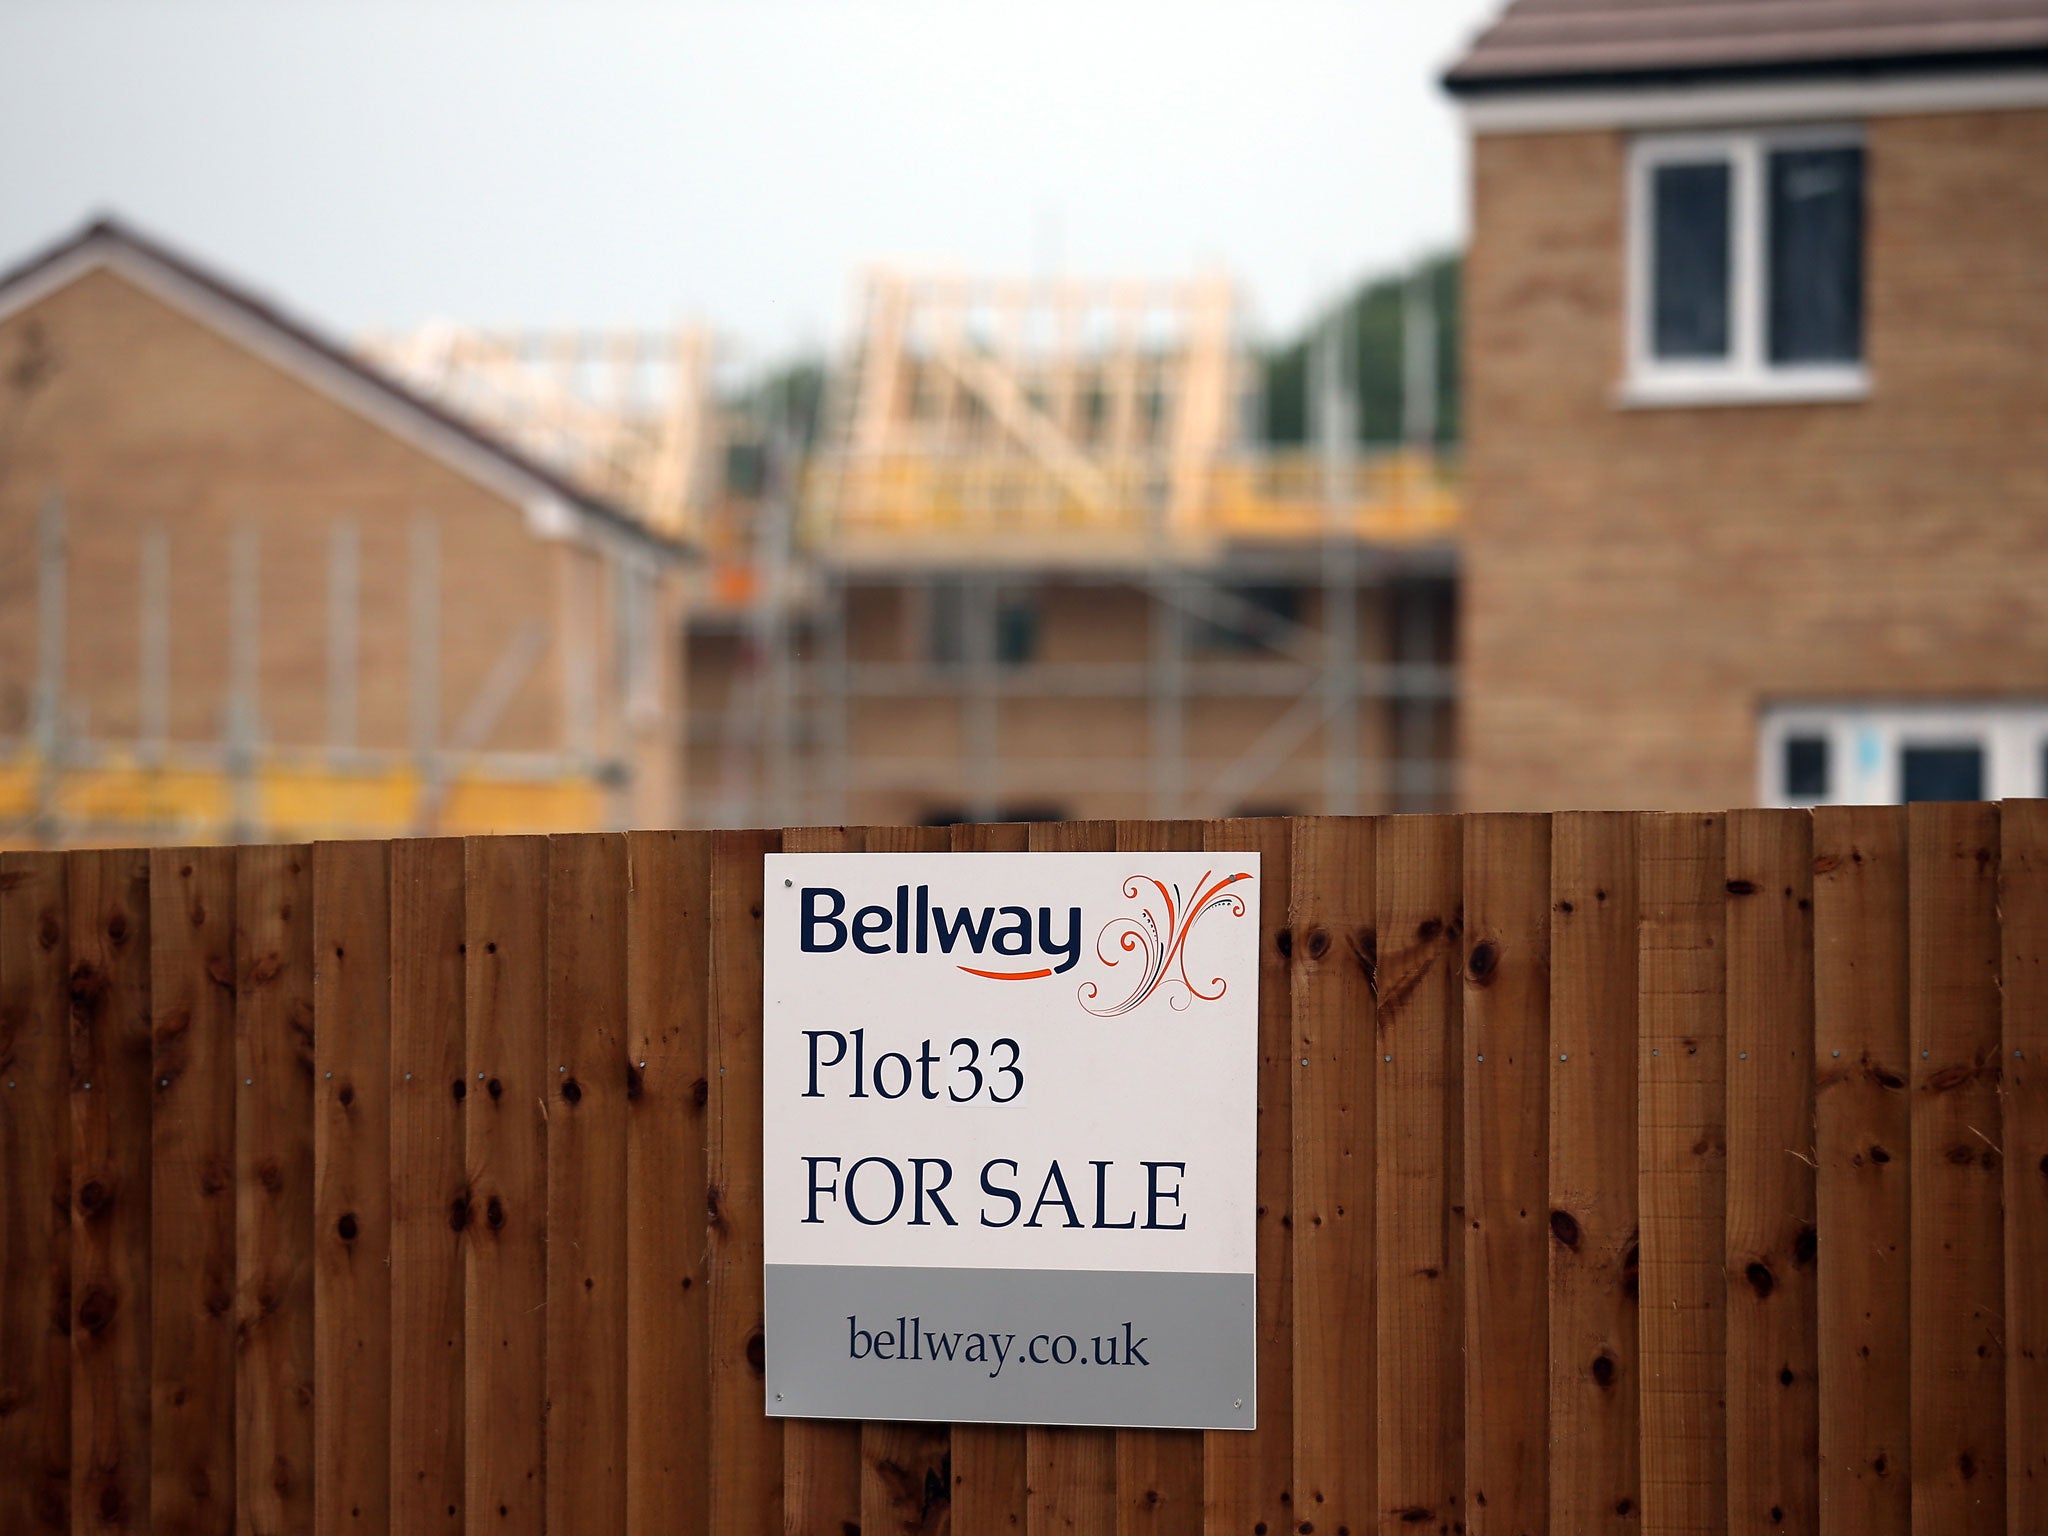 New survey confirms that the property market is becoming overheated